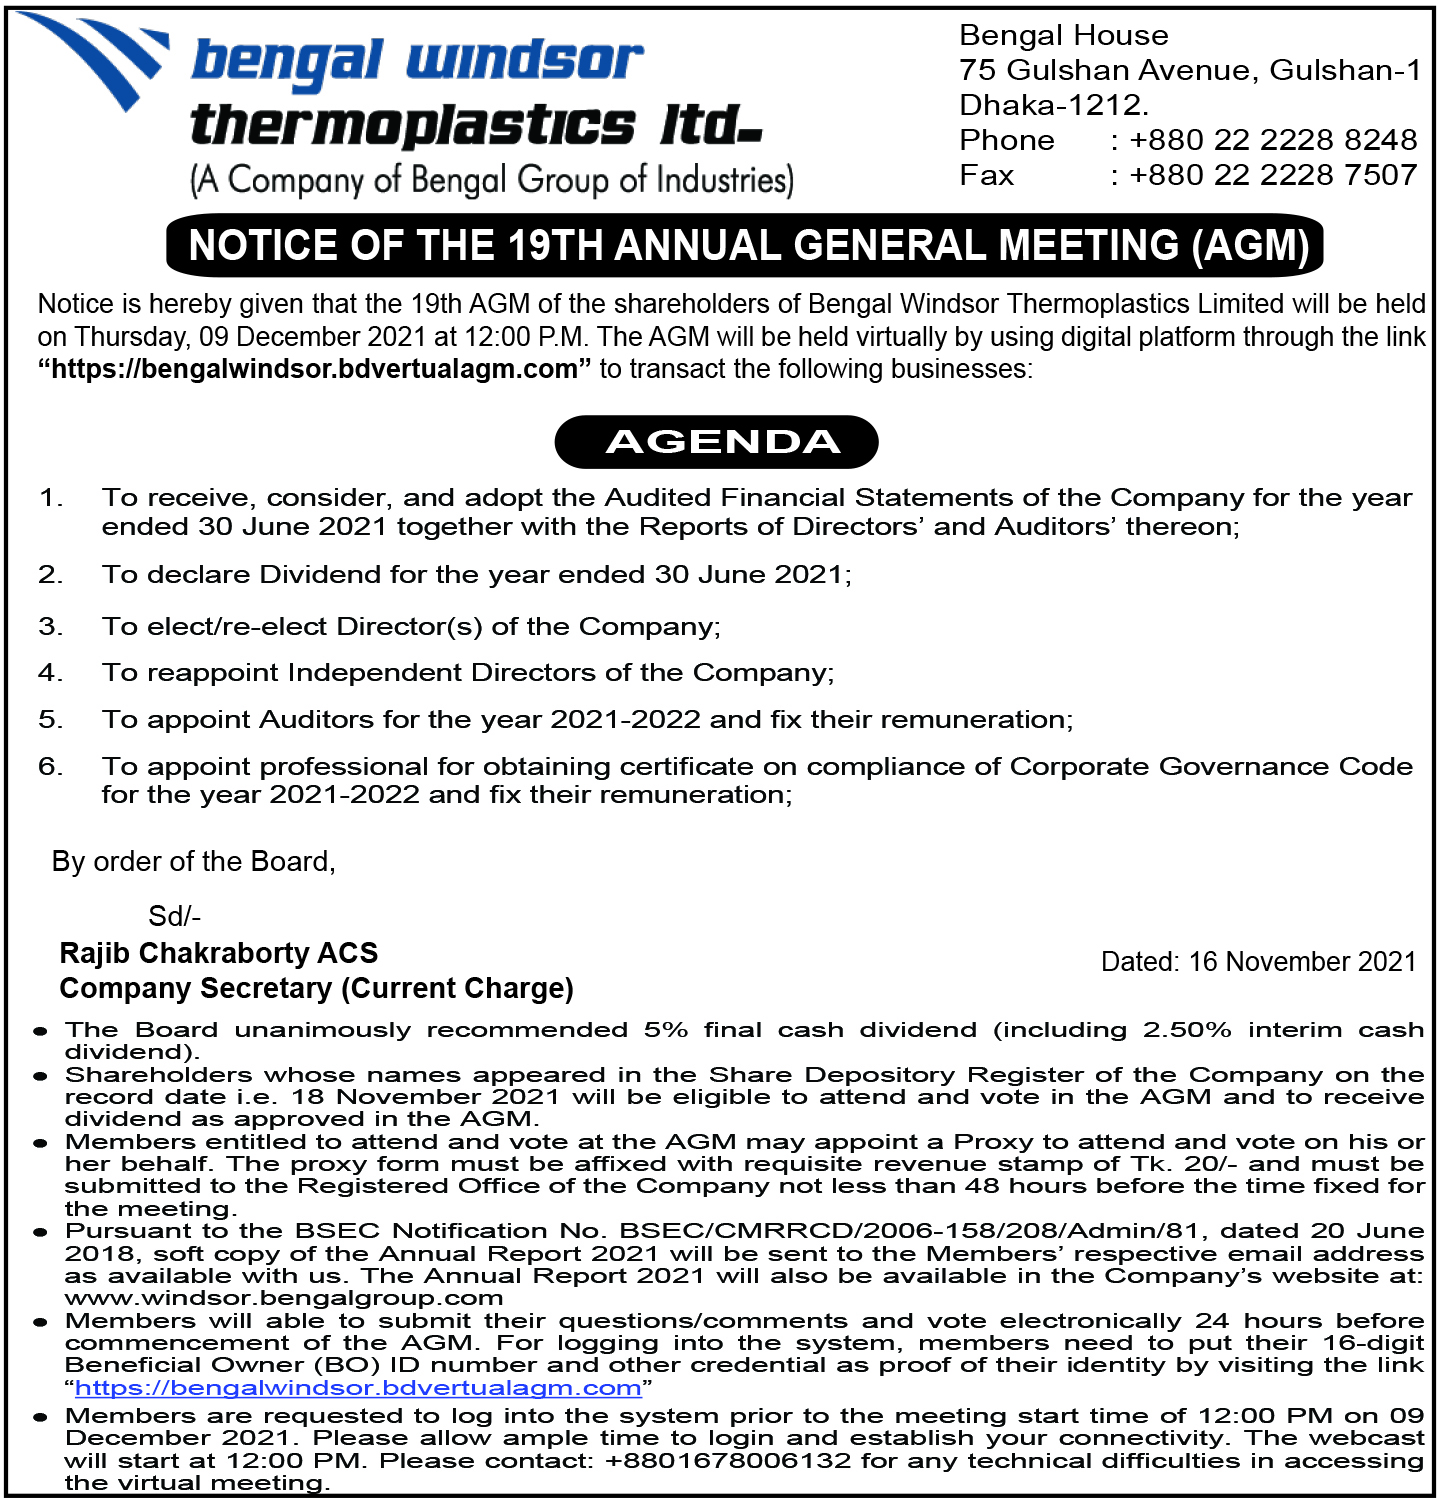 Notice of 19th AGM of Bengal Windsor Thermoplastics Limited